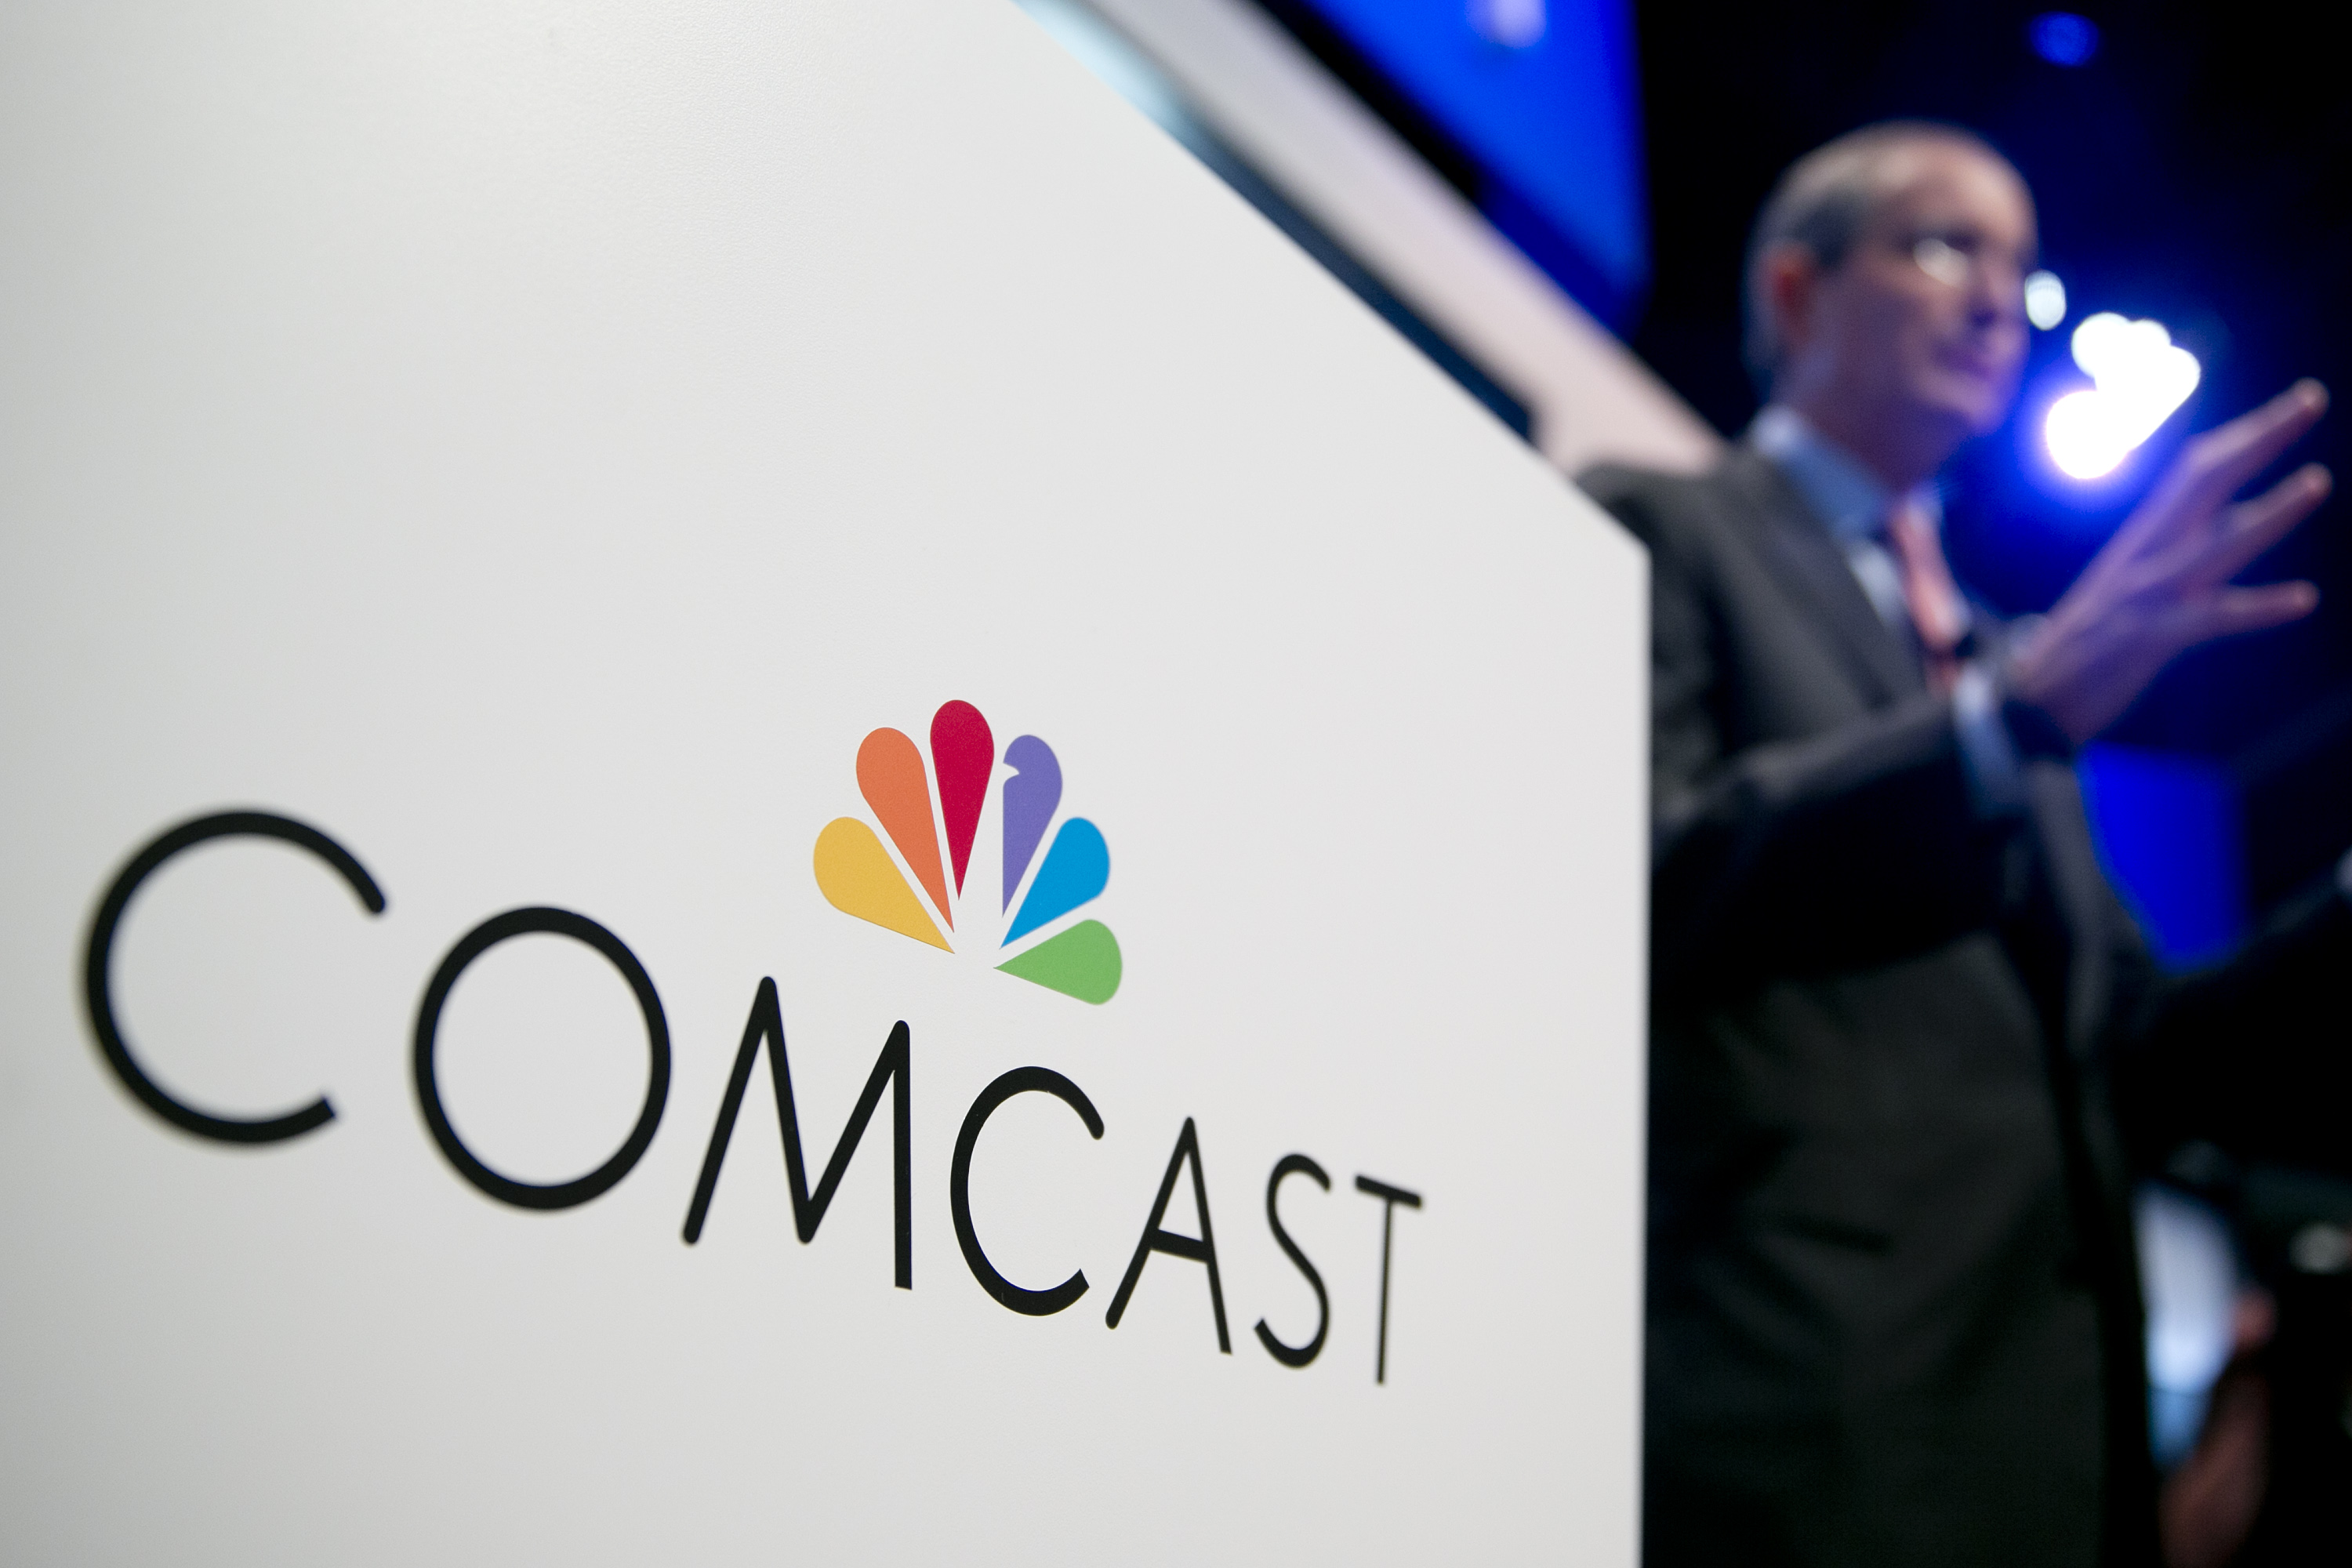 The Comcast Corp. logo is seen as Brian Roberts, chairman and chief executive officer of Comcast Corp. (R) speaks during a news conference in Washington on June 11, 2013. (Bloomberg/Getty Images)